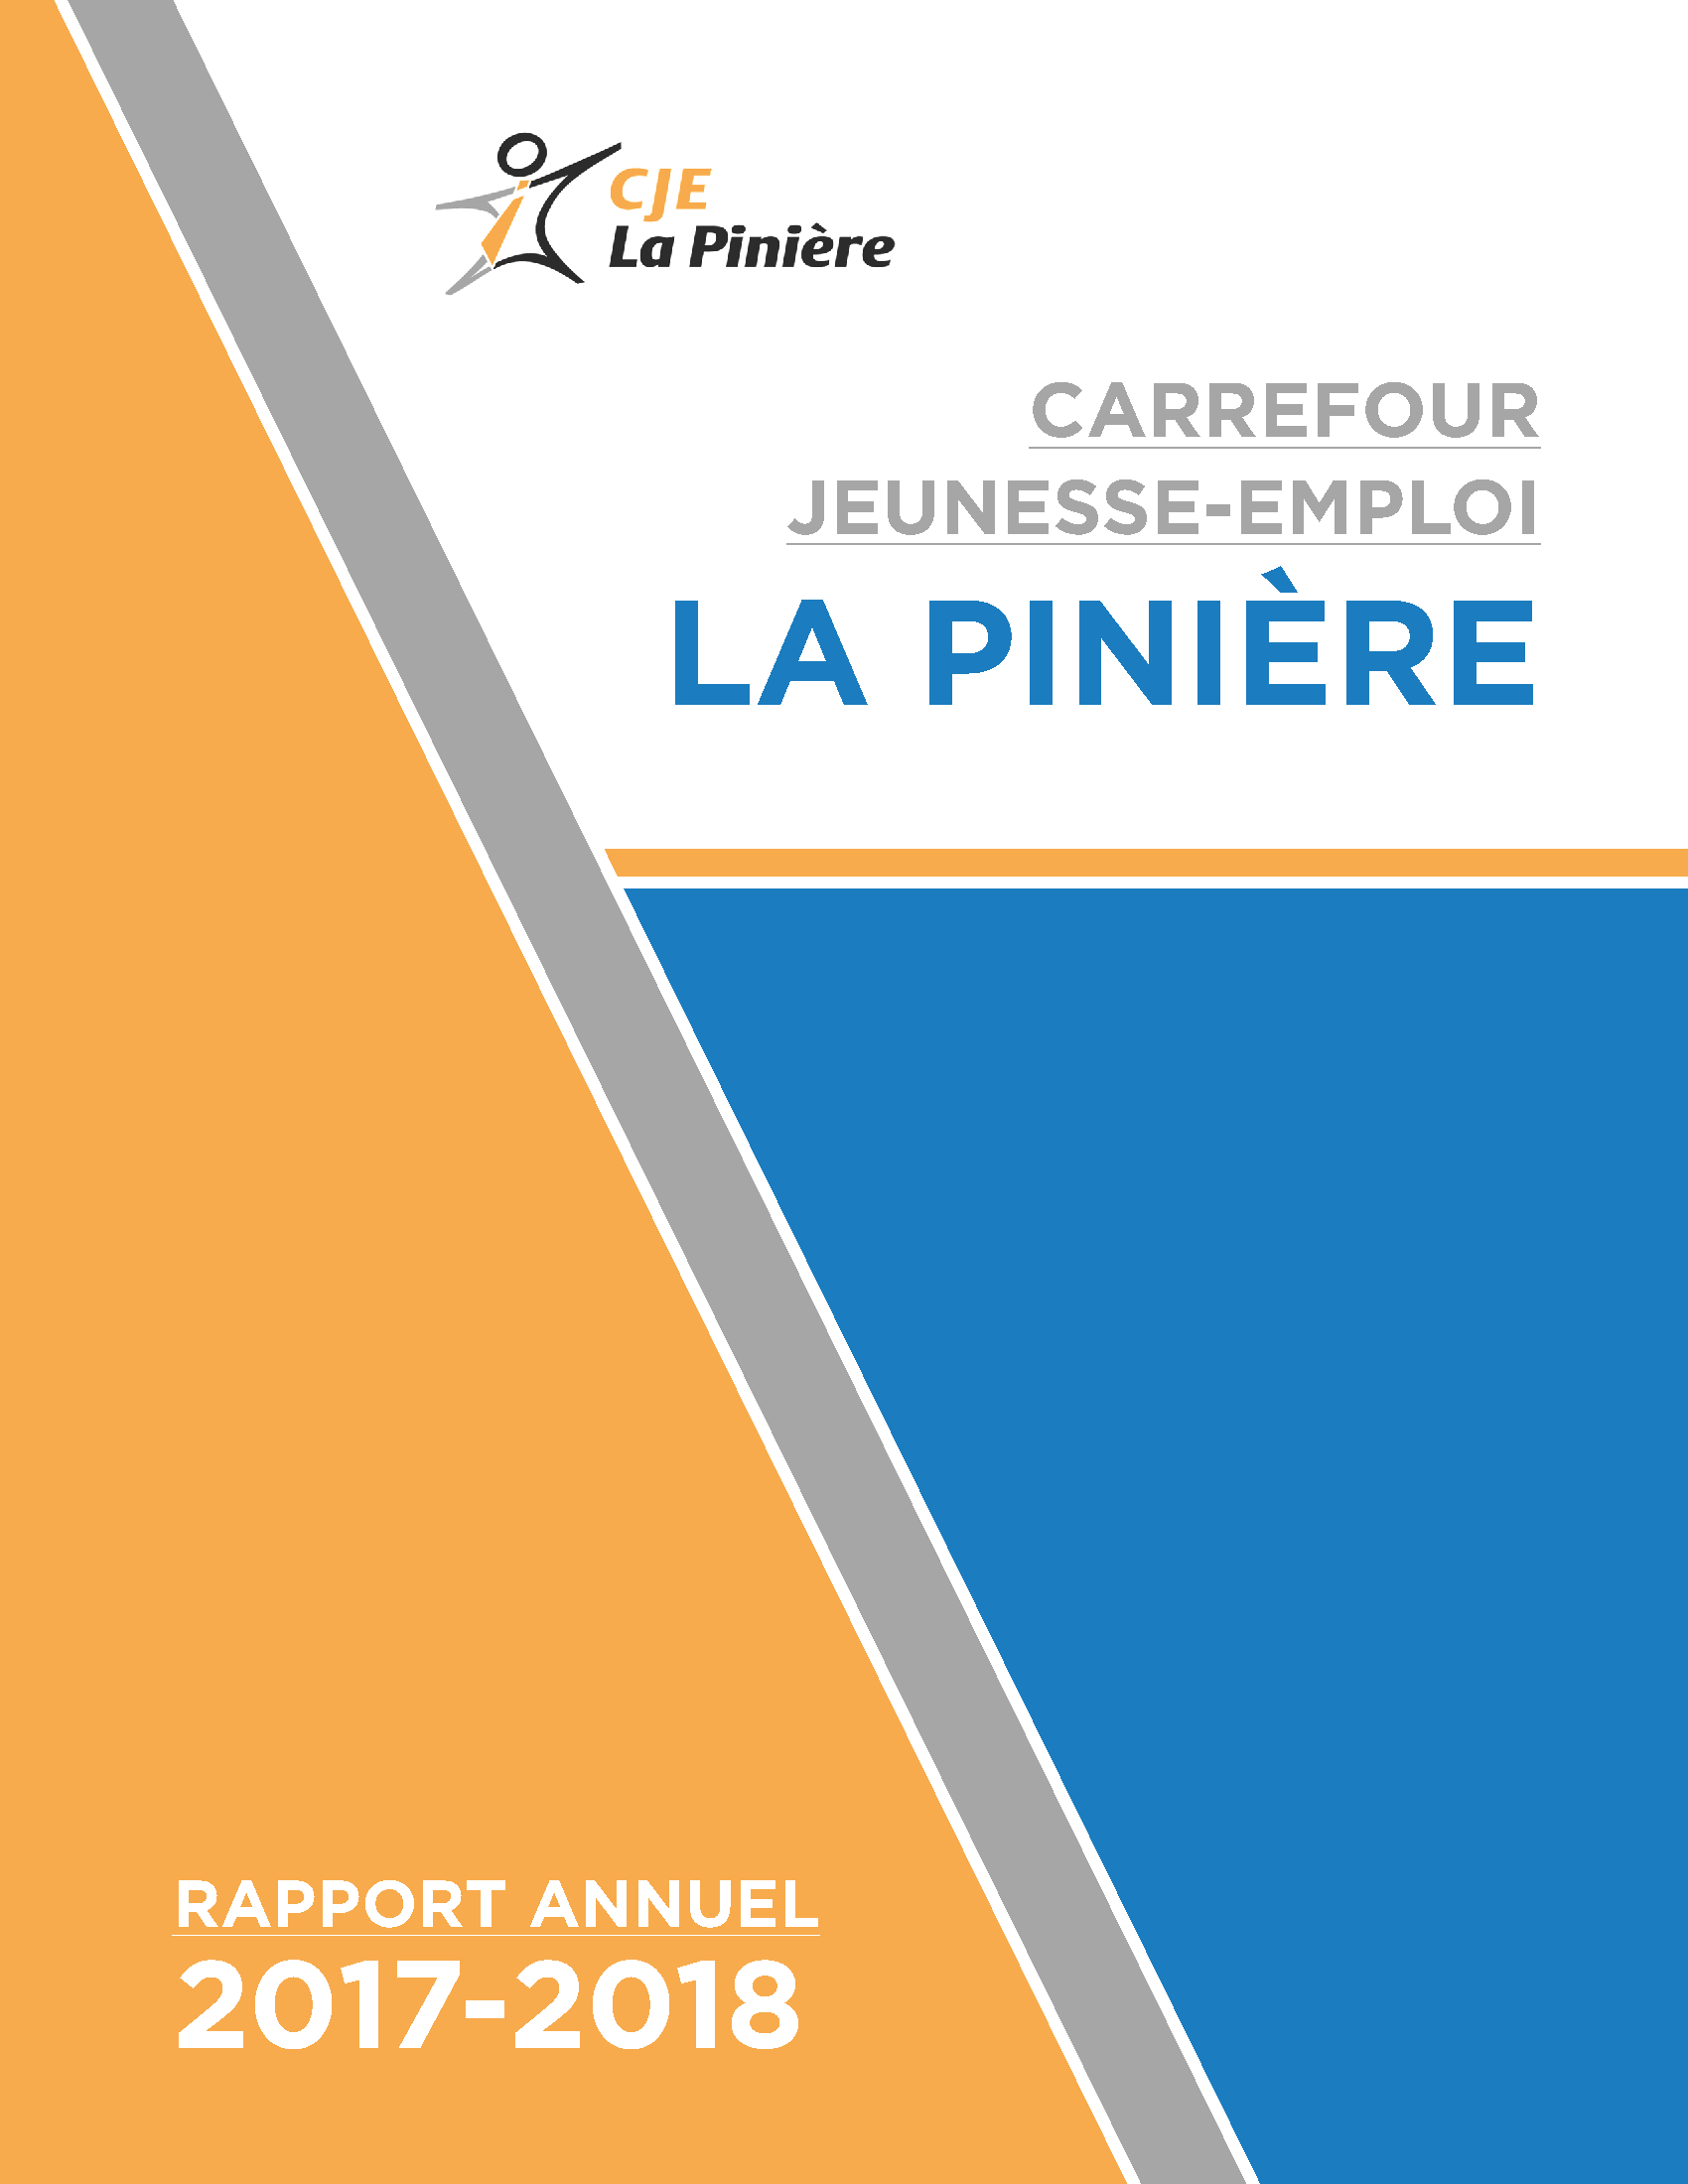 CJE La Piniere Annual Report Design by Clement Lemay-Chaput (Montreal)